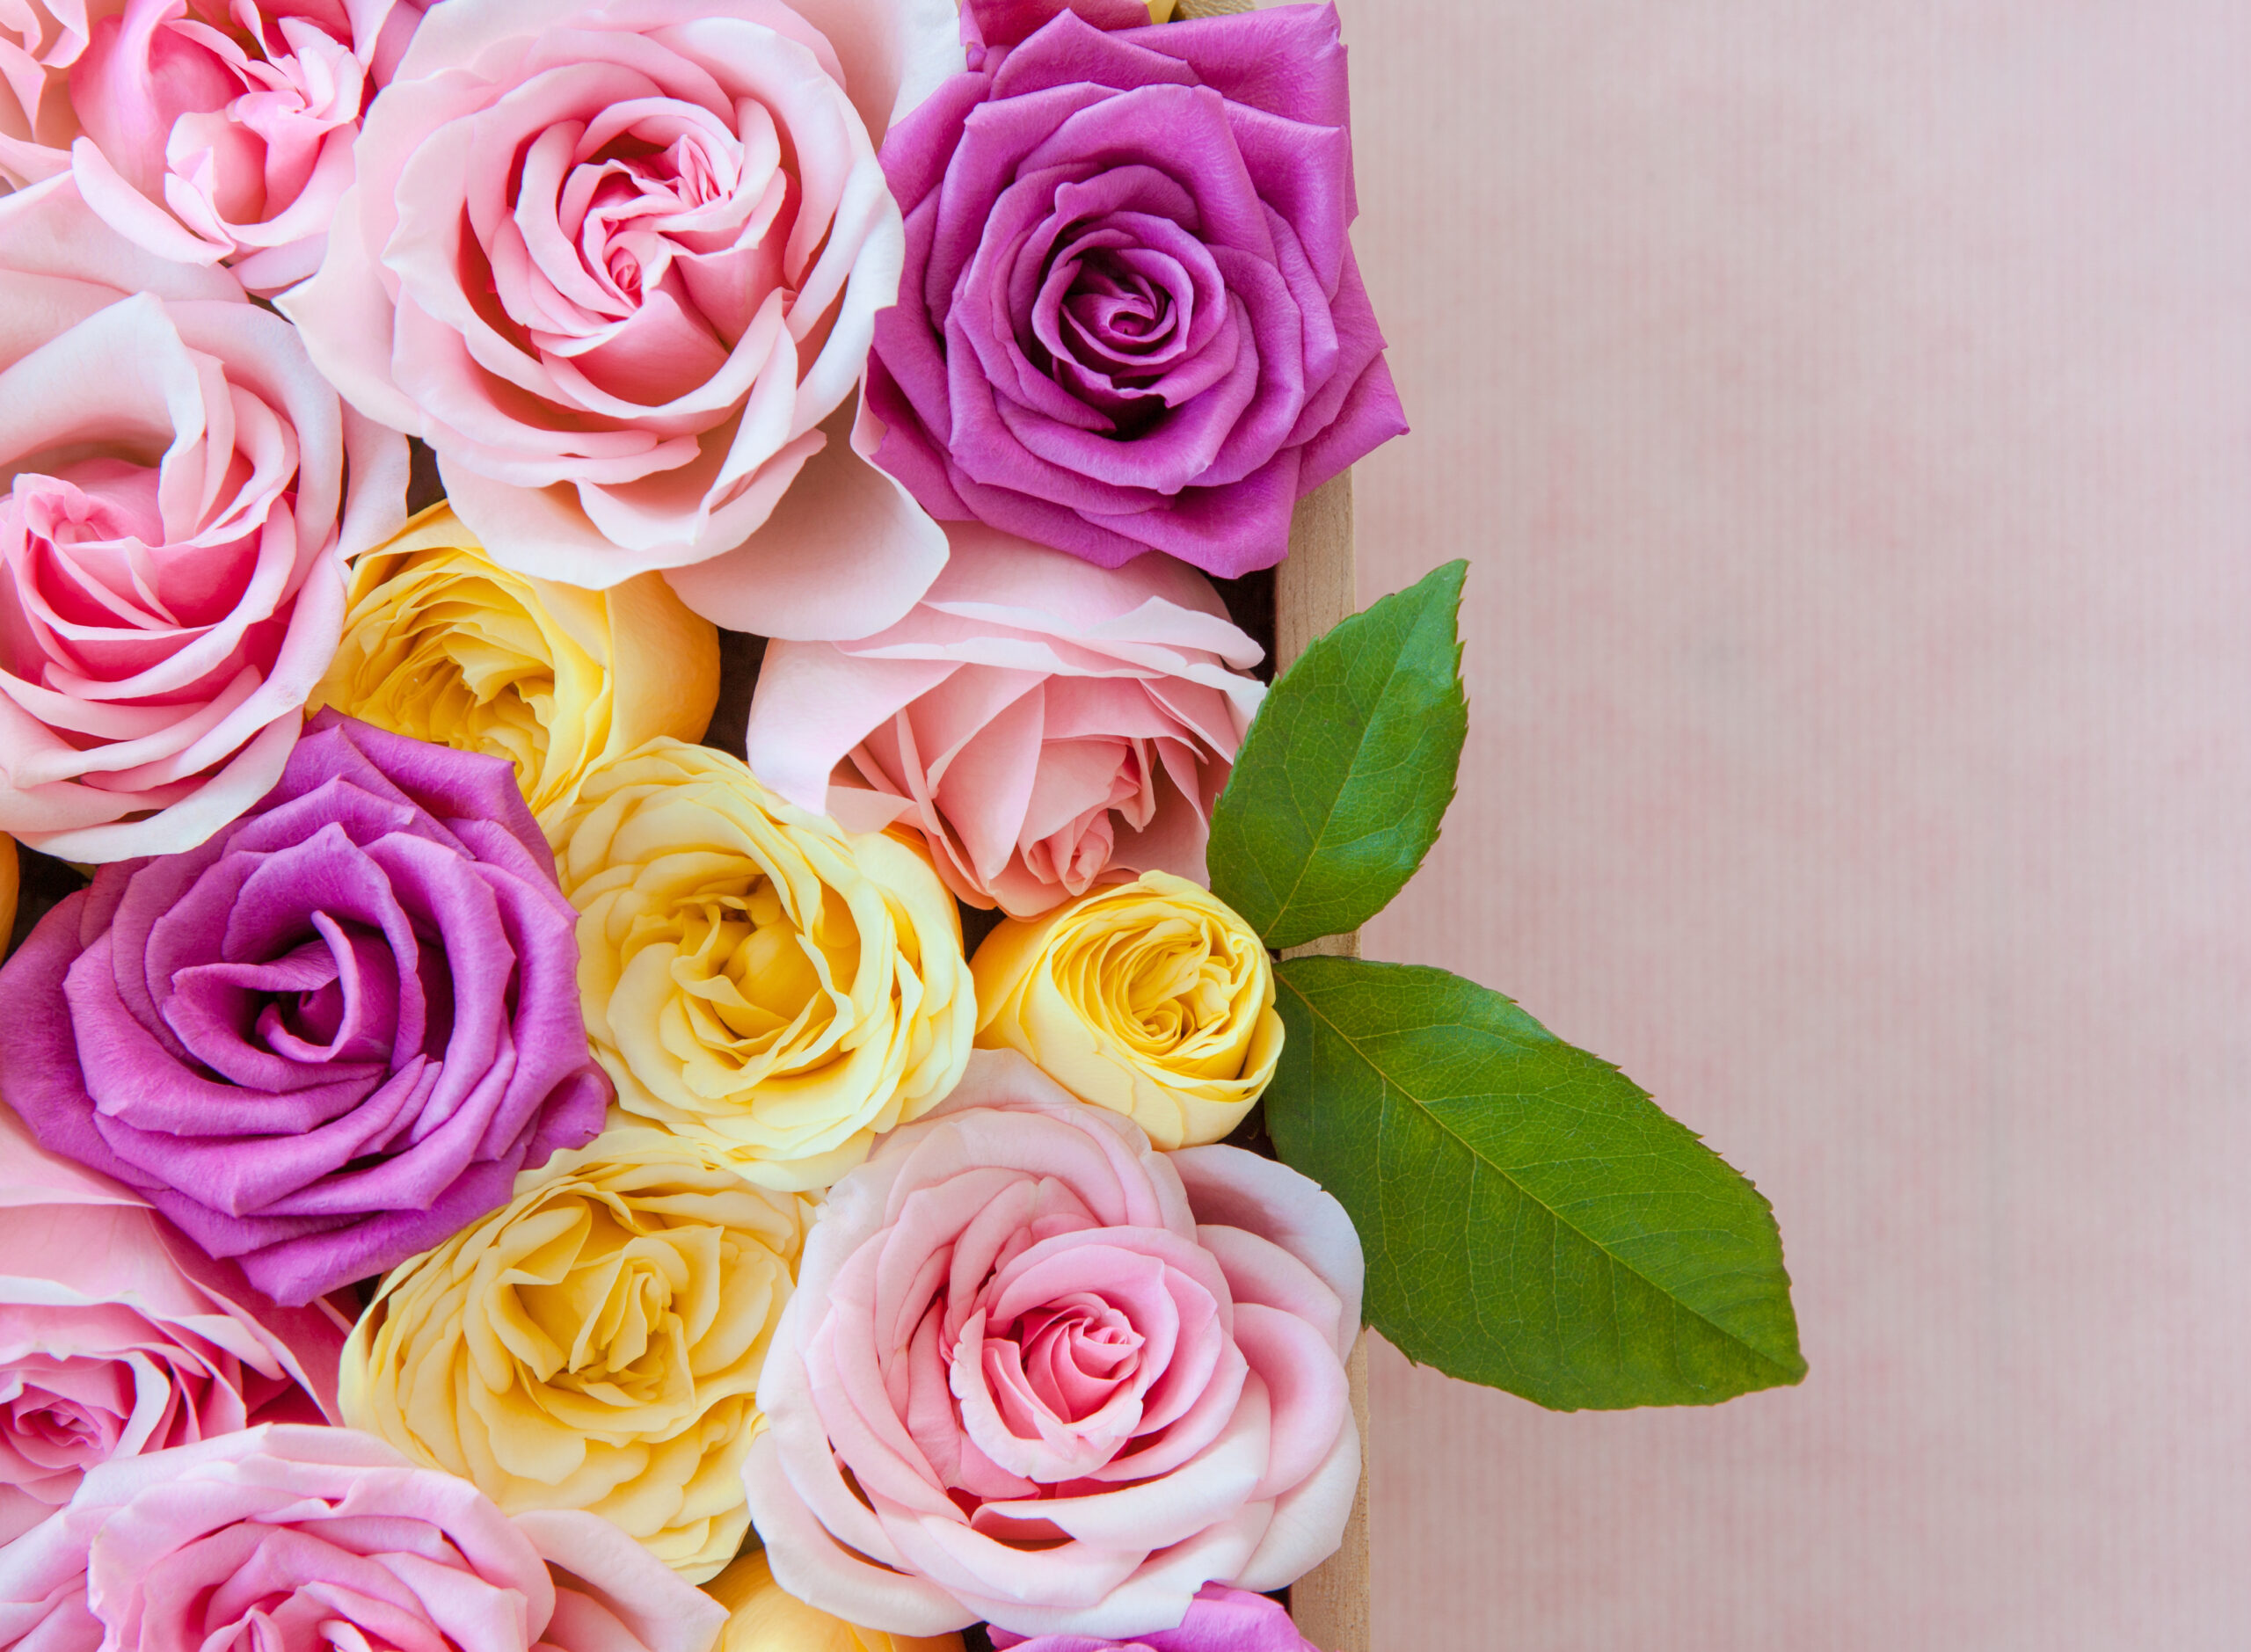 Fresh roses in different colors as a background